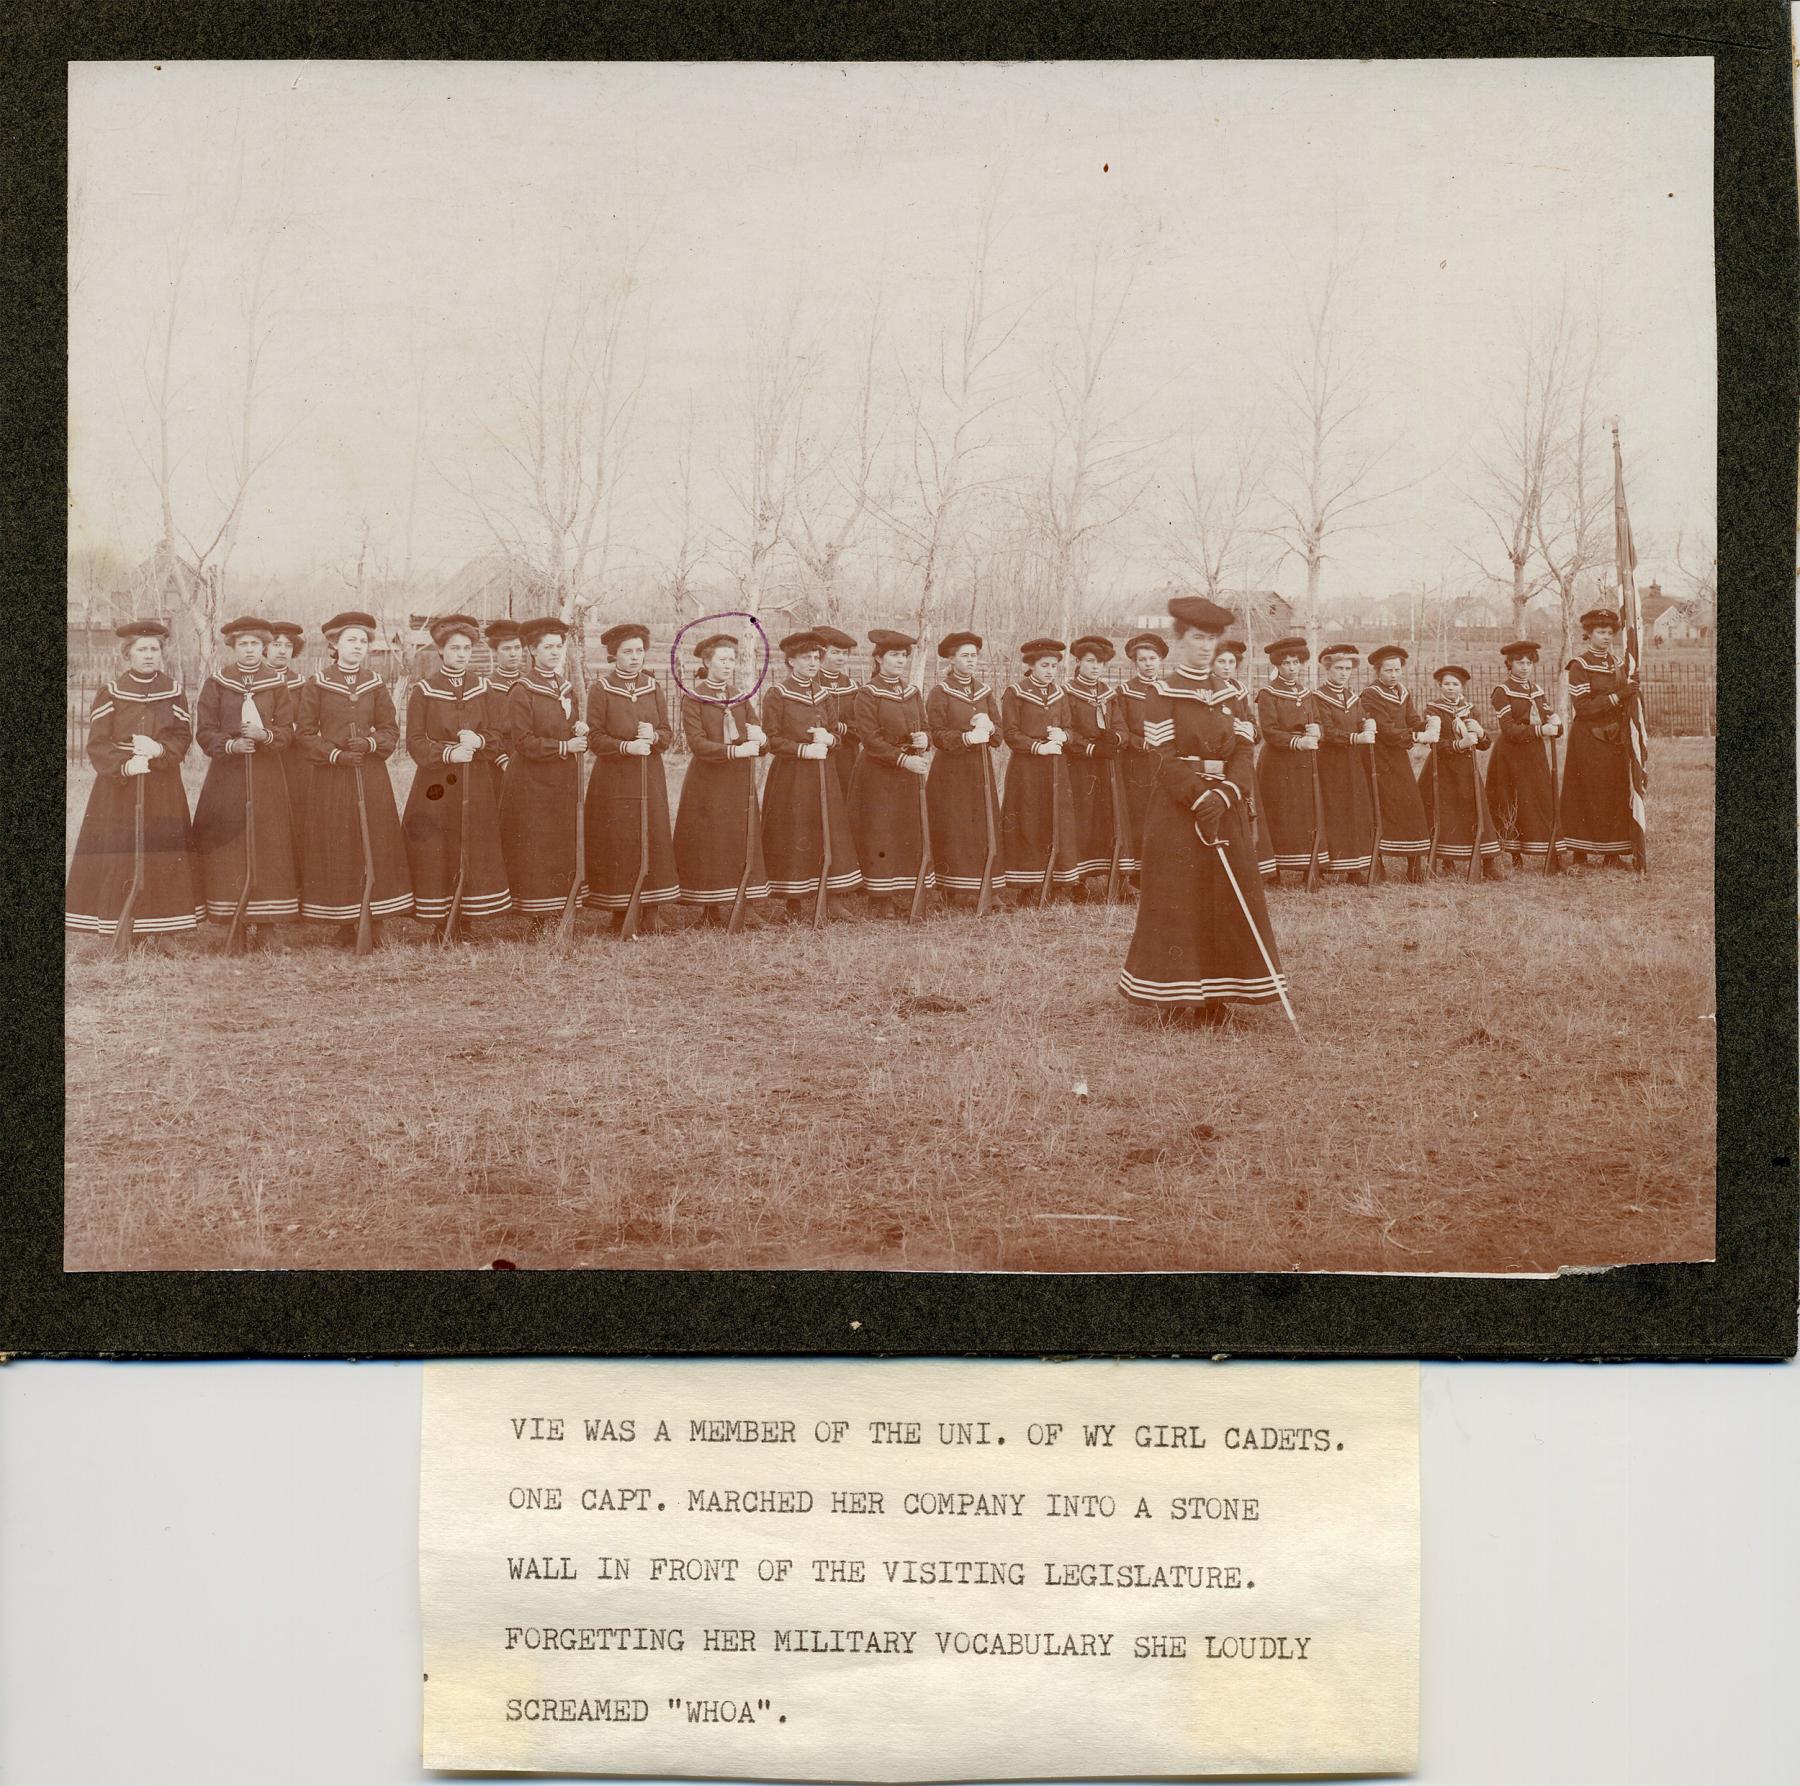 Vie, her face circled here, was a member of an all-female drill team while at the University of Wyoming in Laramie in the first years of the 20th century. The caption details one of the team's adventures. Garber family photo.